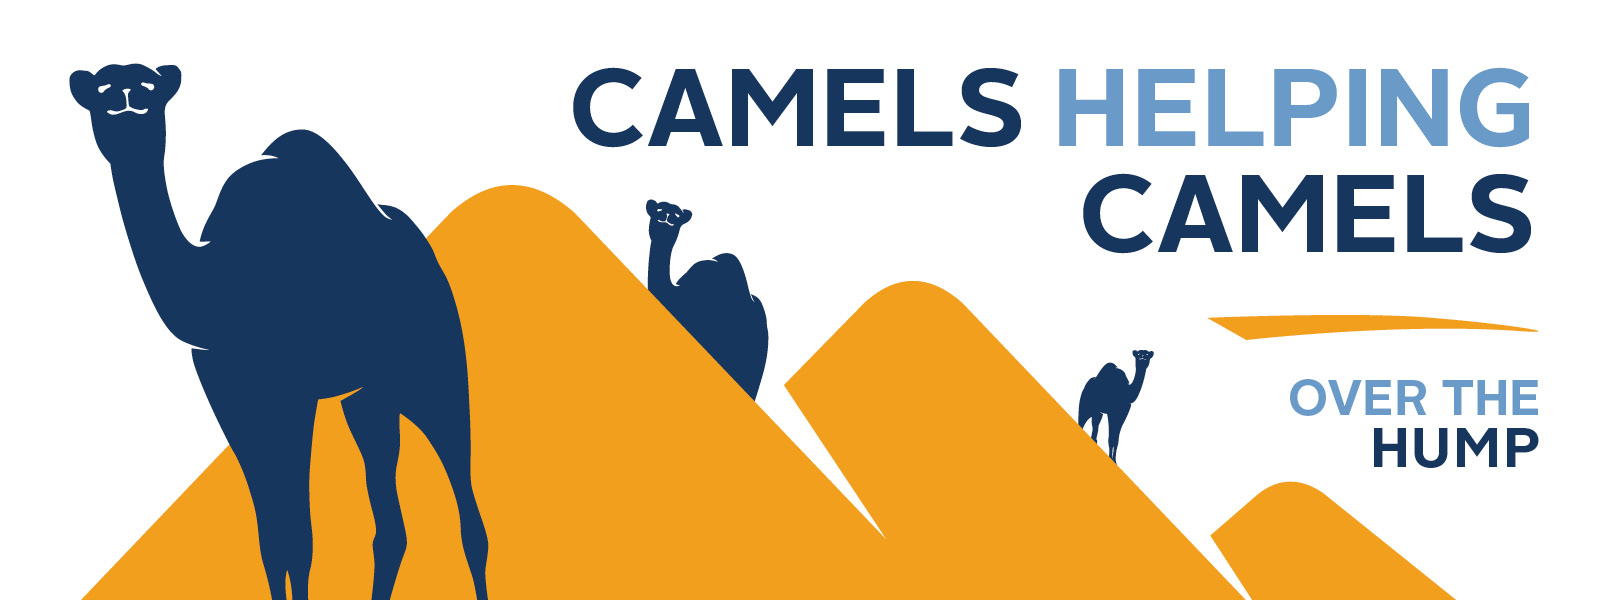 Camels Helping Camels Graphic